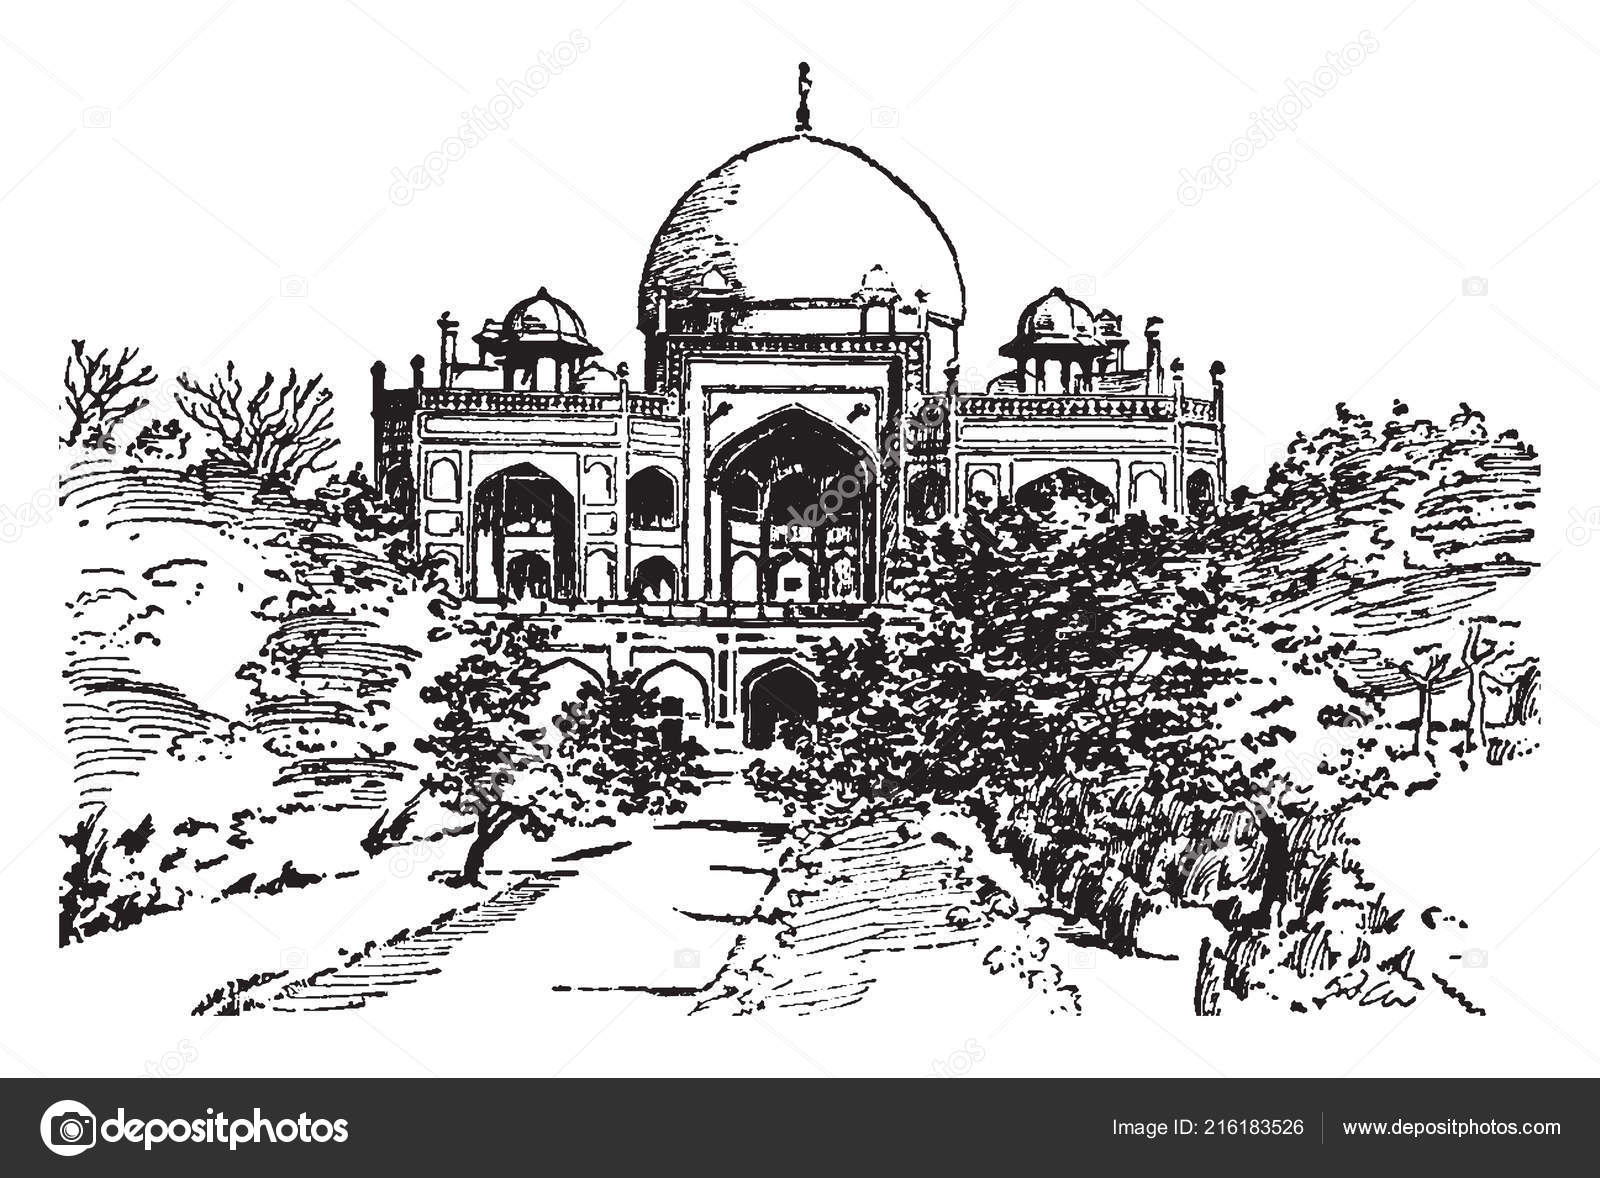 How to draw Humayun Tomb step by step - YouTube